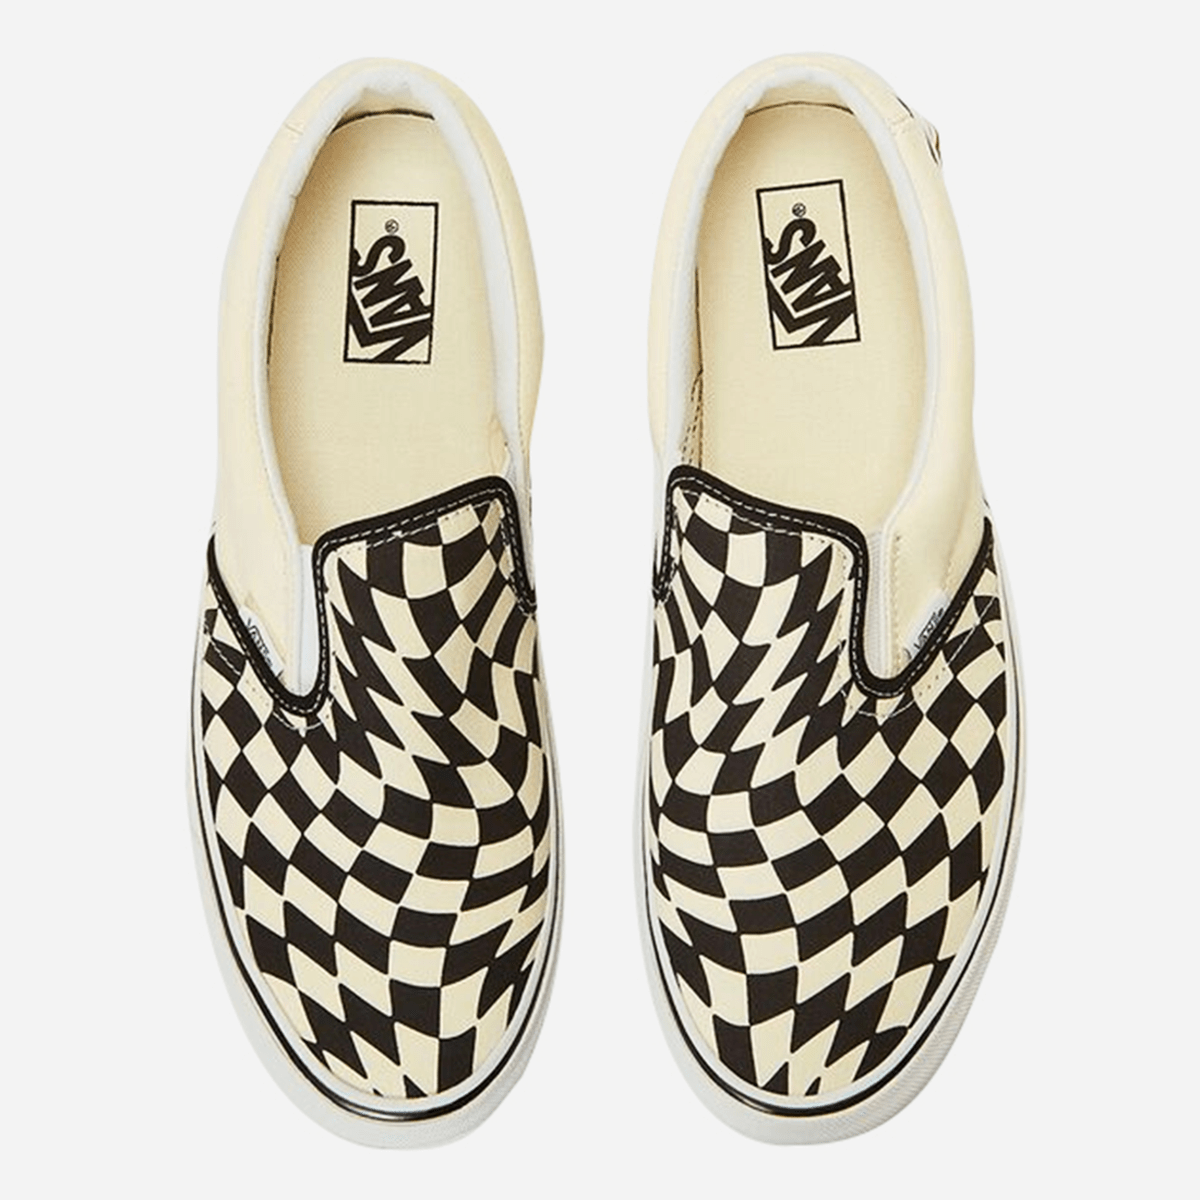 The Vans Checkerboard Slip-On Gets a Twisted Remix -